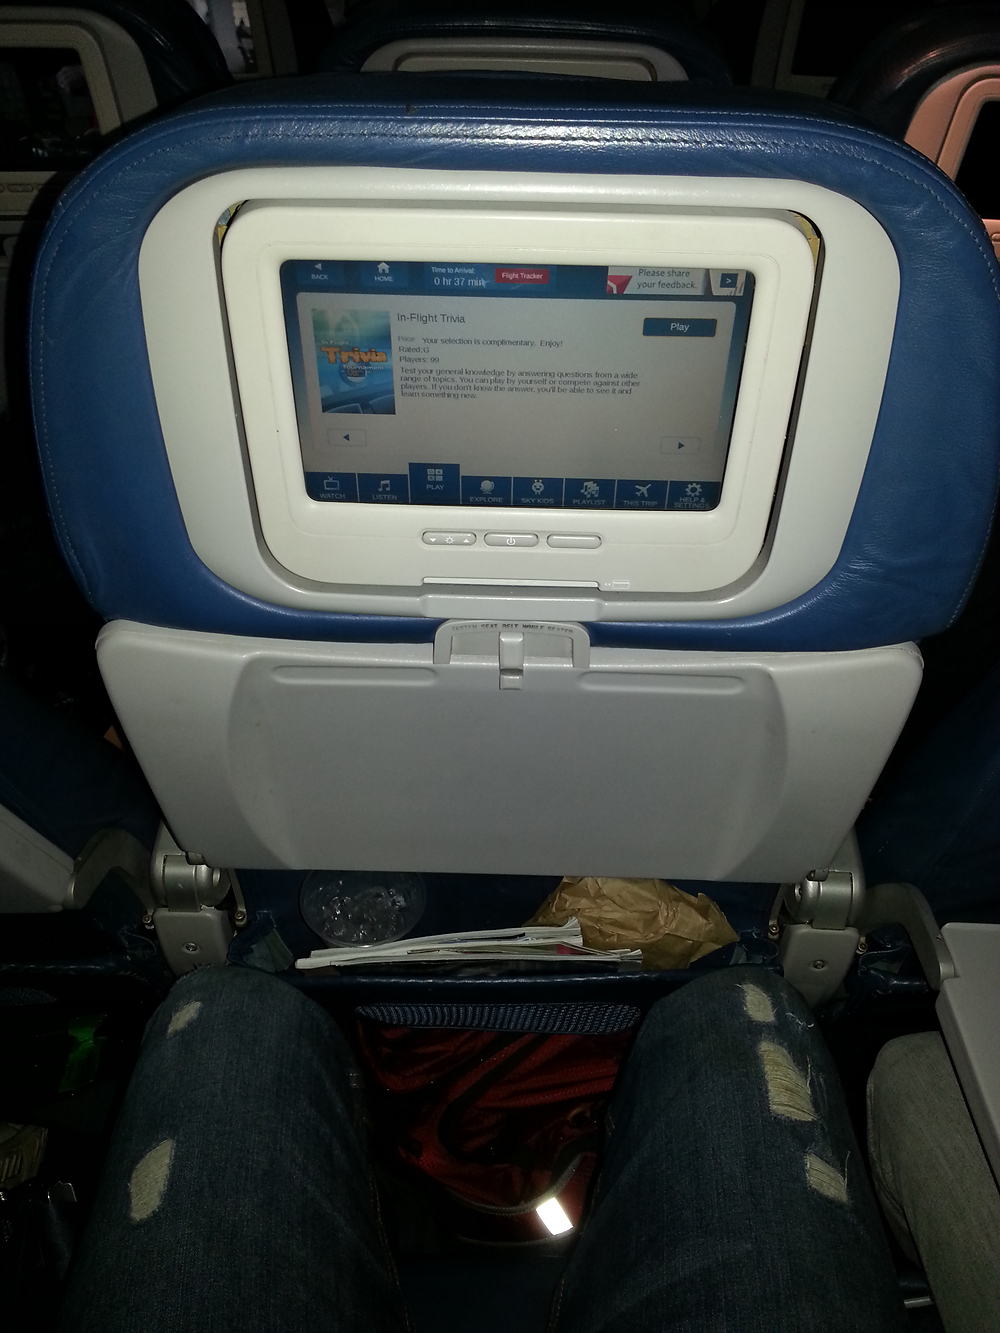 Review Flying On A Delta Air Lines Boeing 777 200lr Domestically Airlinereporter